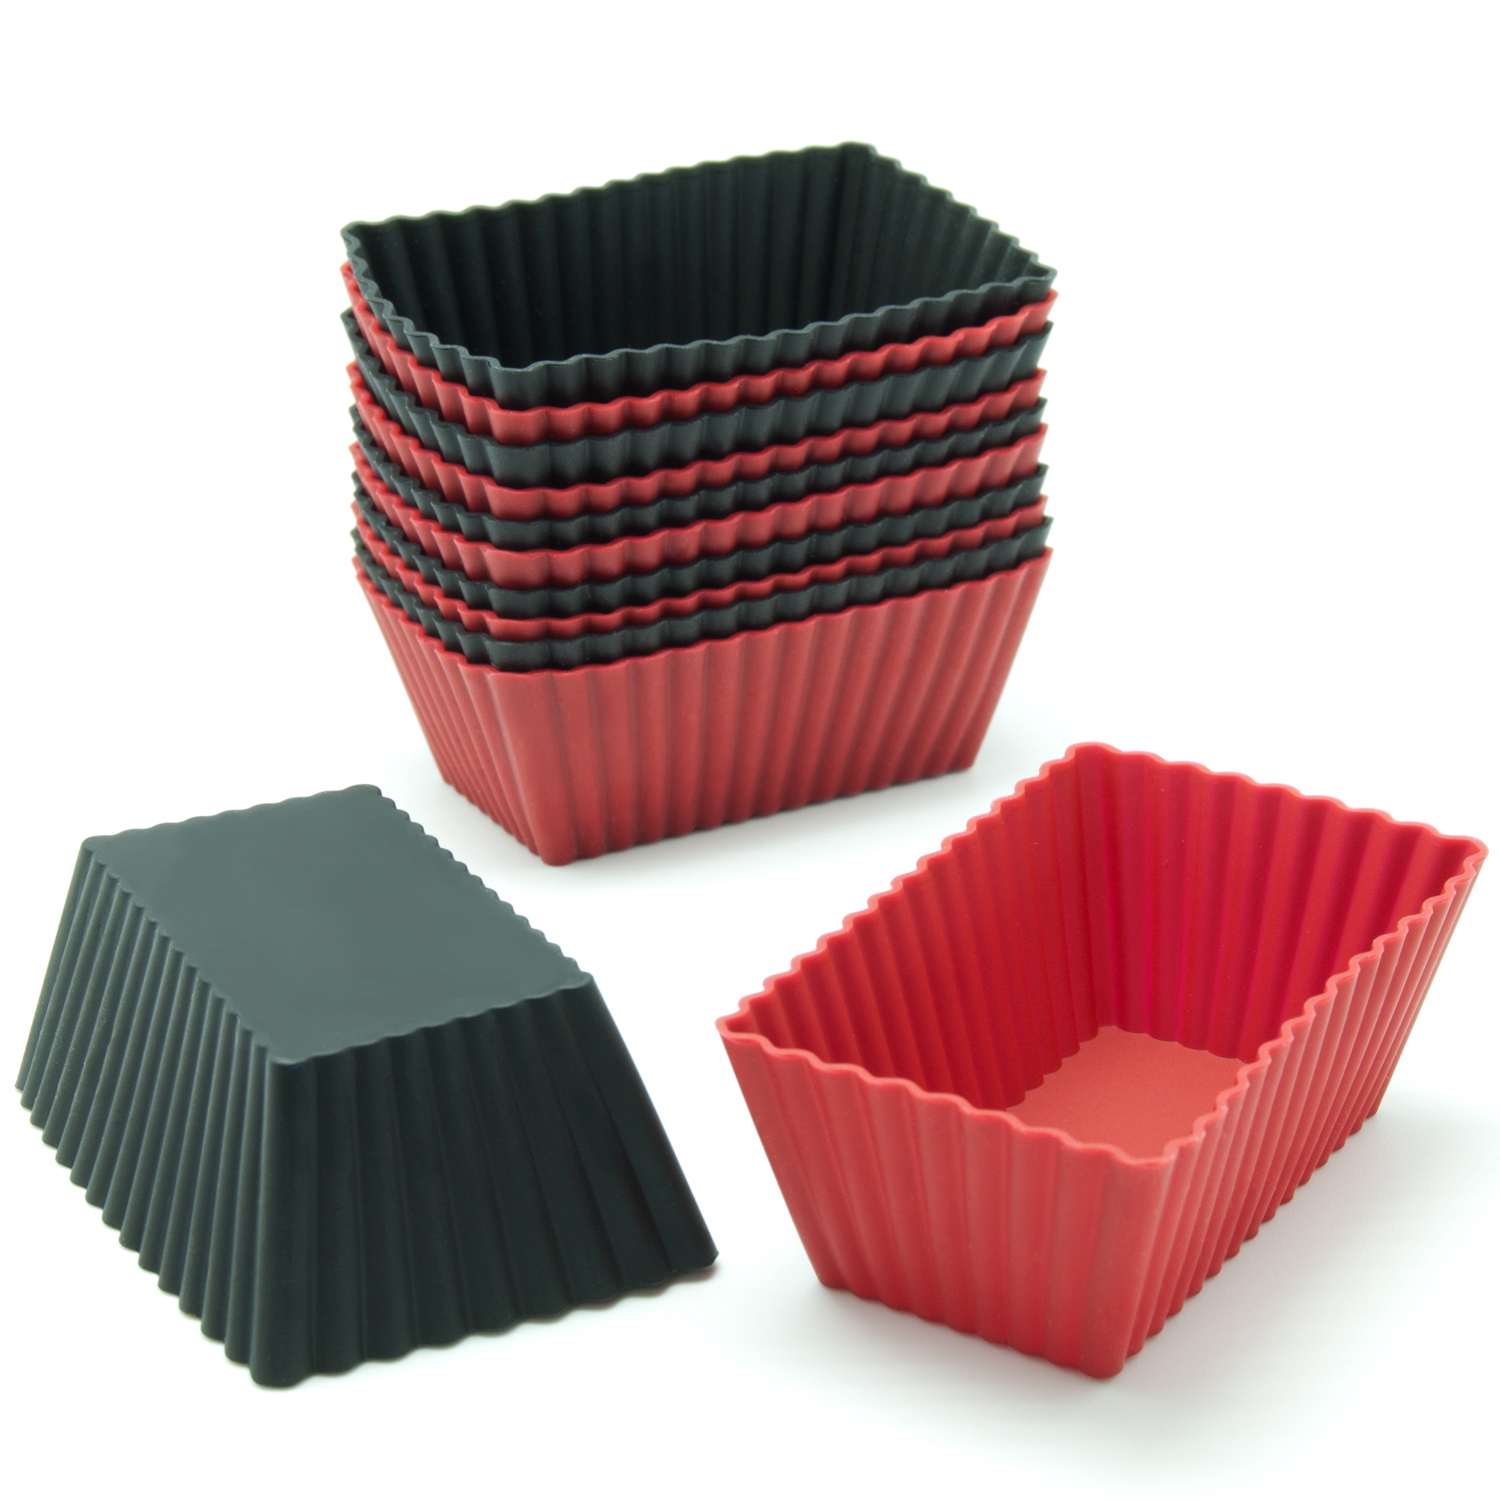 Freshware Silicone Cupcake Liners / Baking Cups - 12-Pack Muffin Molds, Rectangle, Red and Black Colors